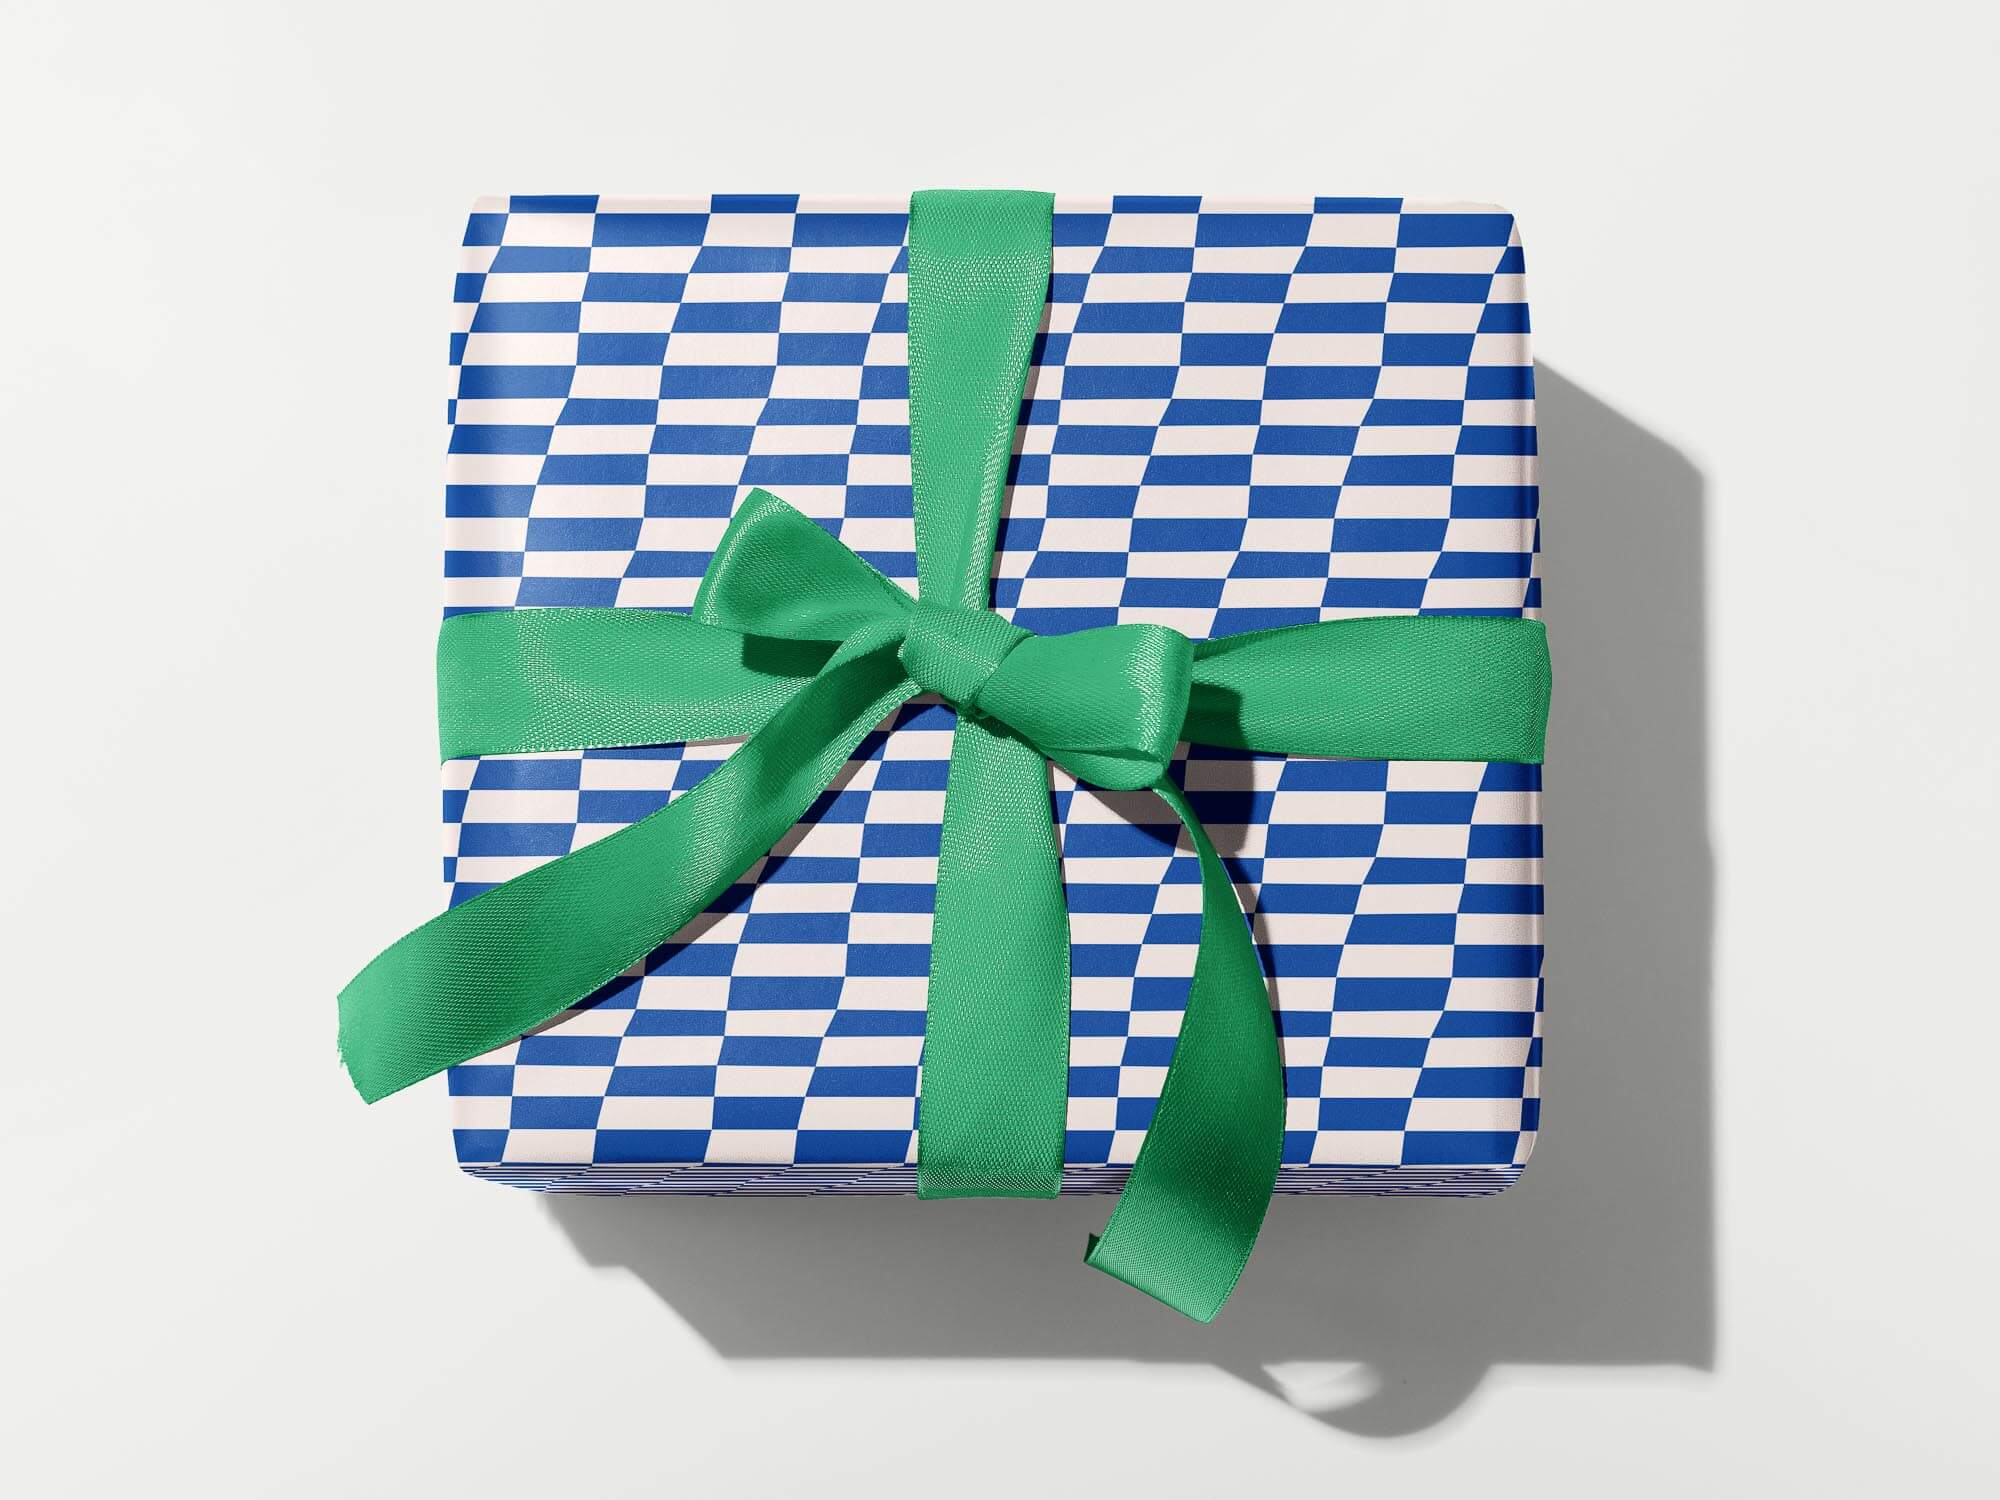 Lean Ennui blue and white leaning checkerboard pattern wrapping paper. Colorful, modern, gift wrapping sheets with fun prints and patterns by @mydarlin_bk. Made in USA.